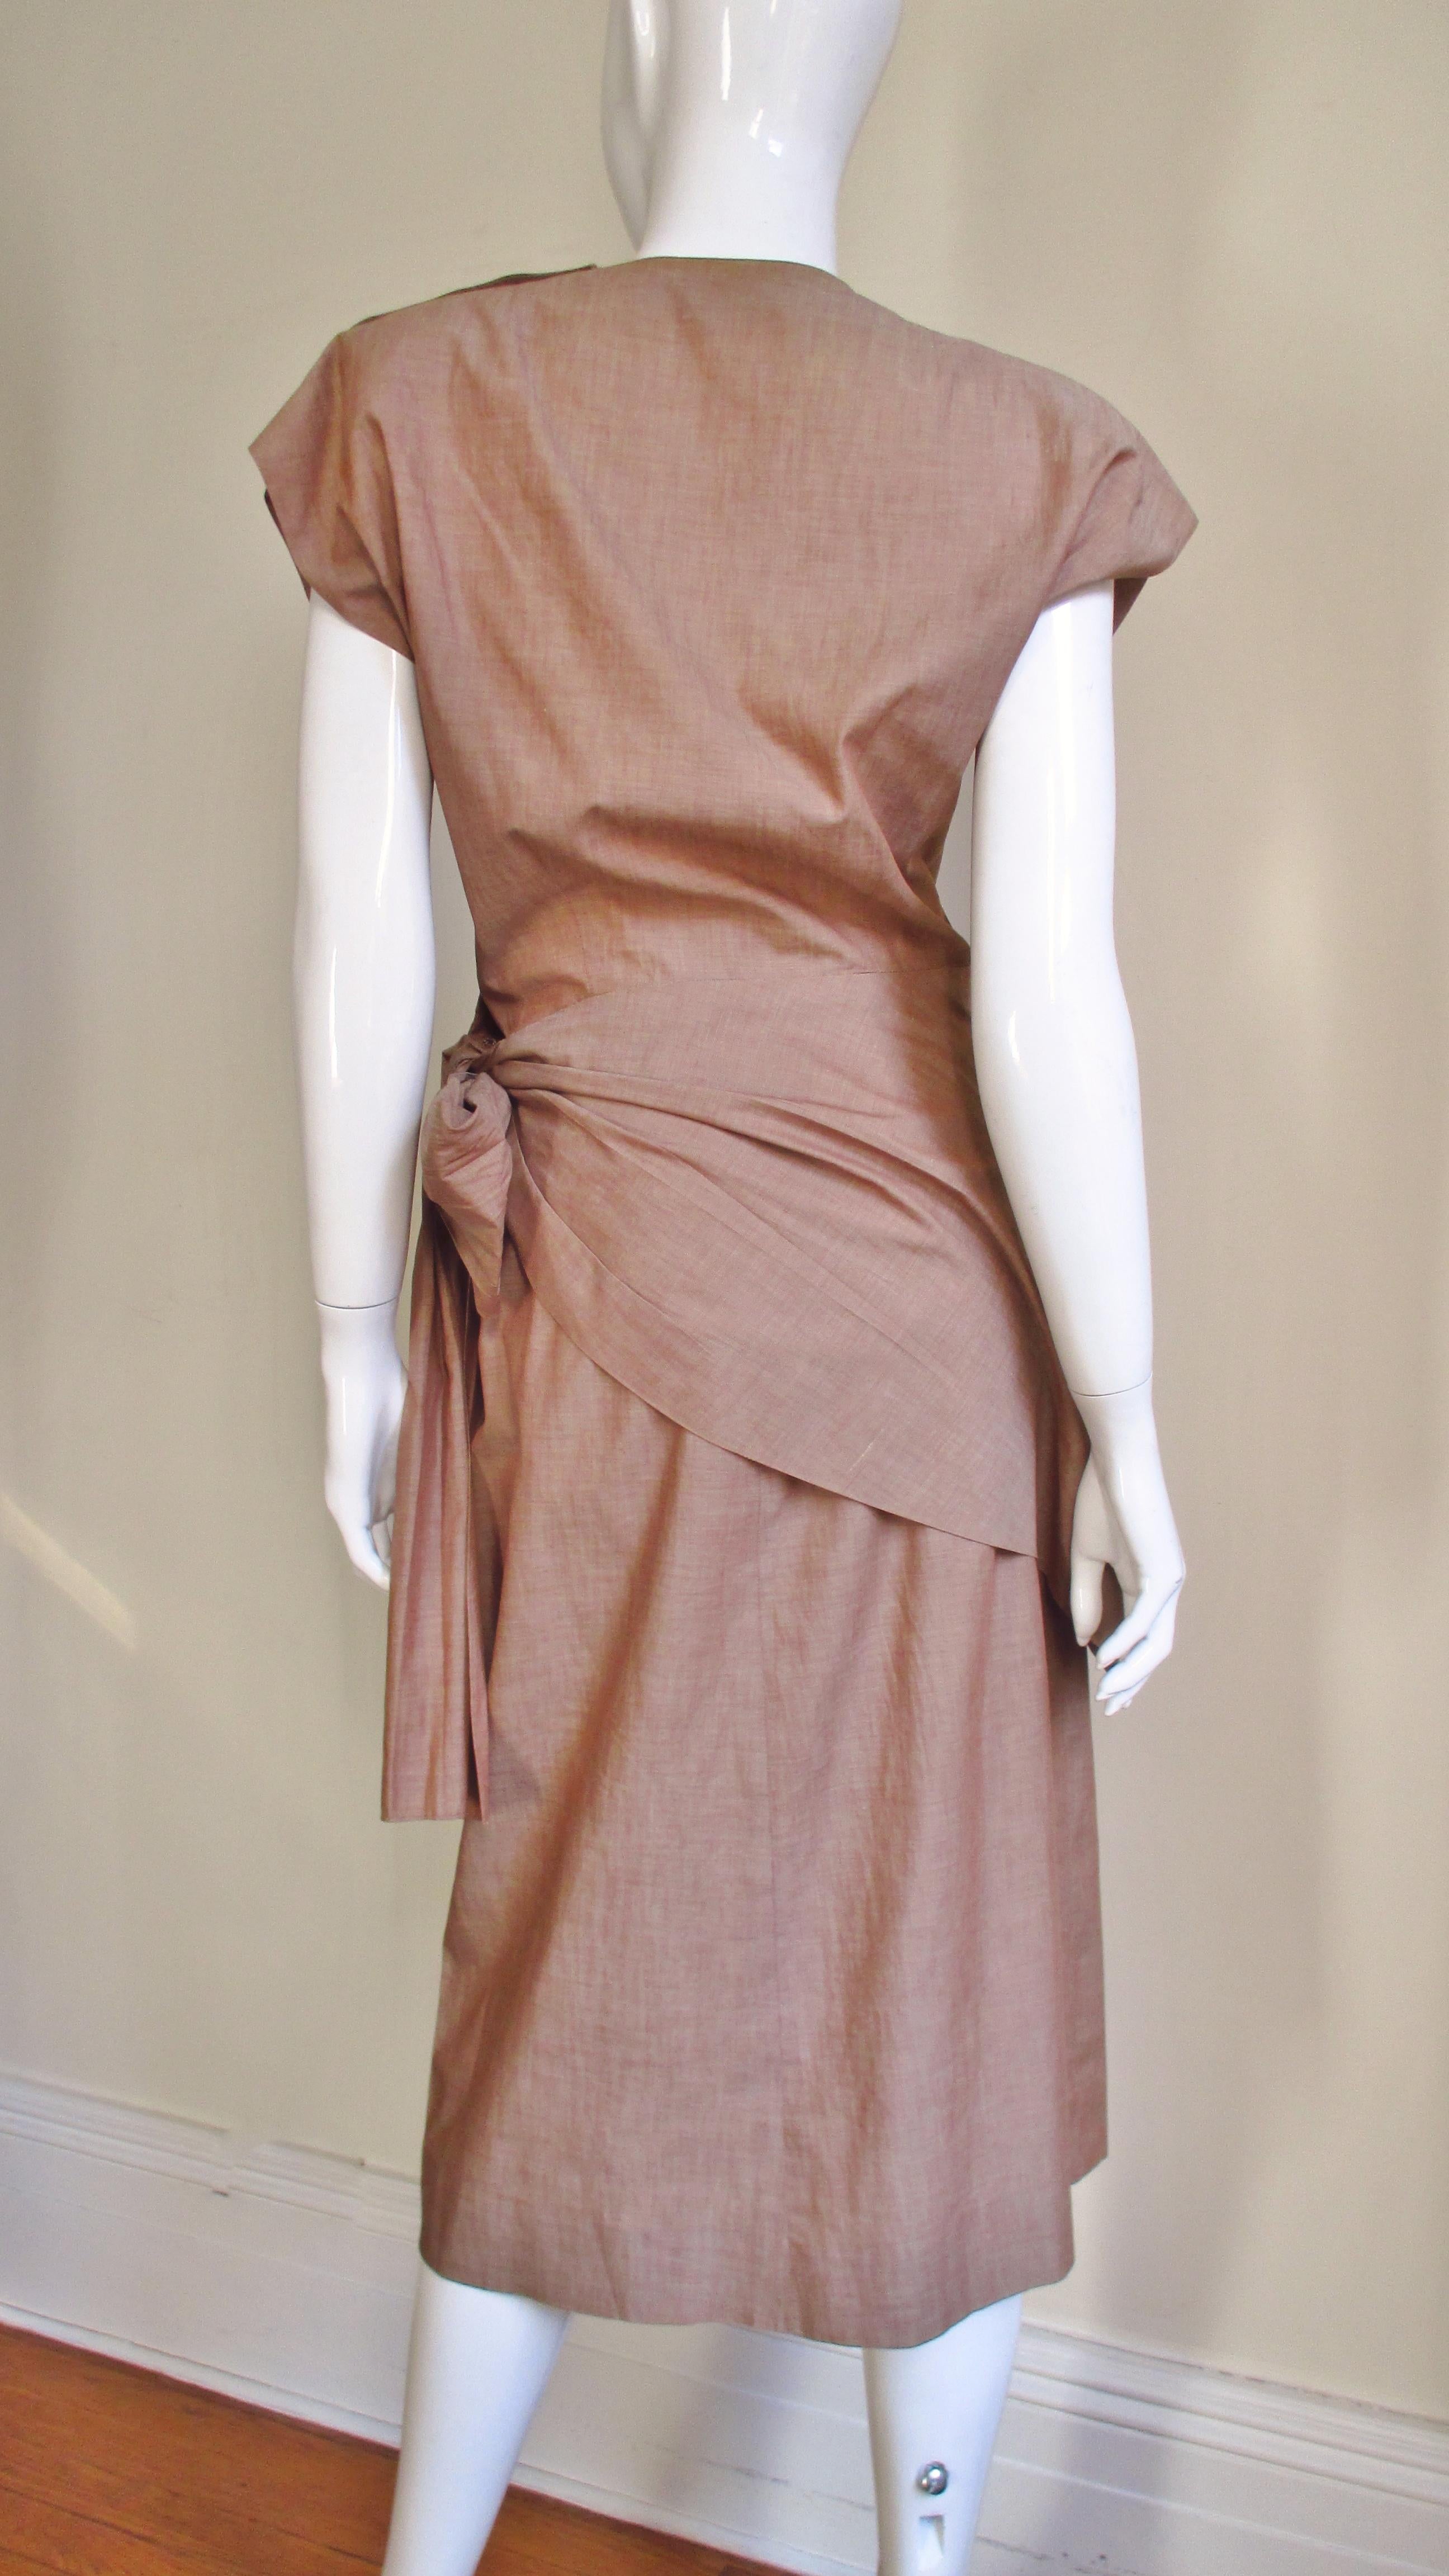  Adele Simpson 1940s Wrap Top and Skirt For Sale 3